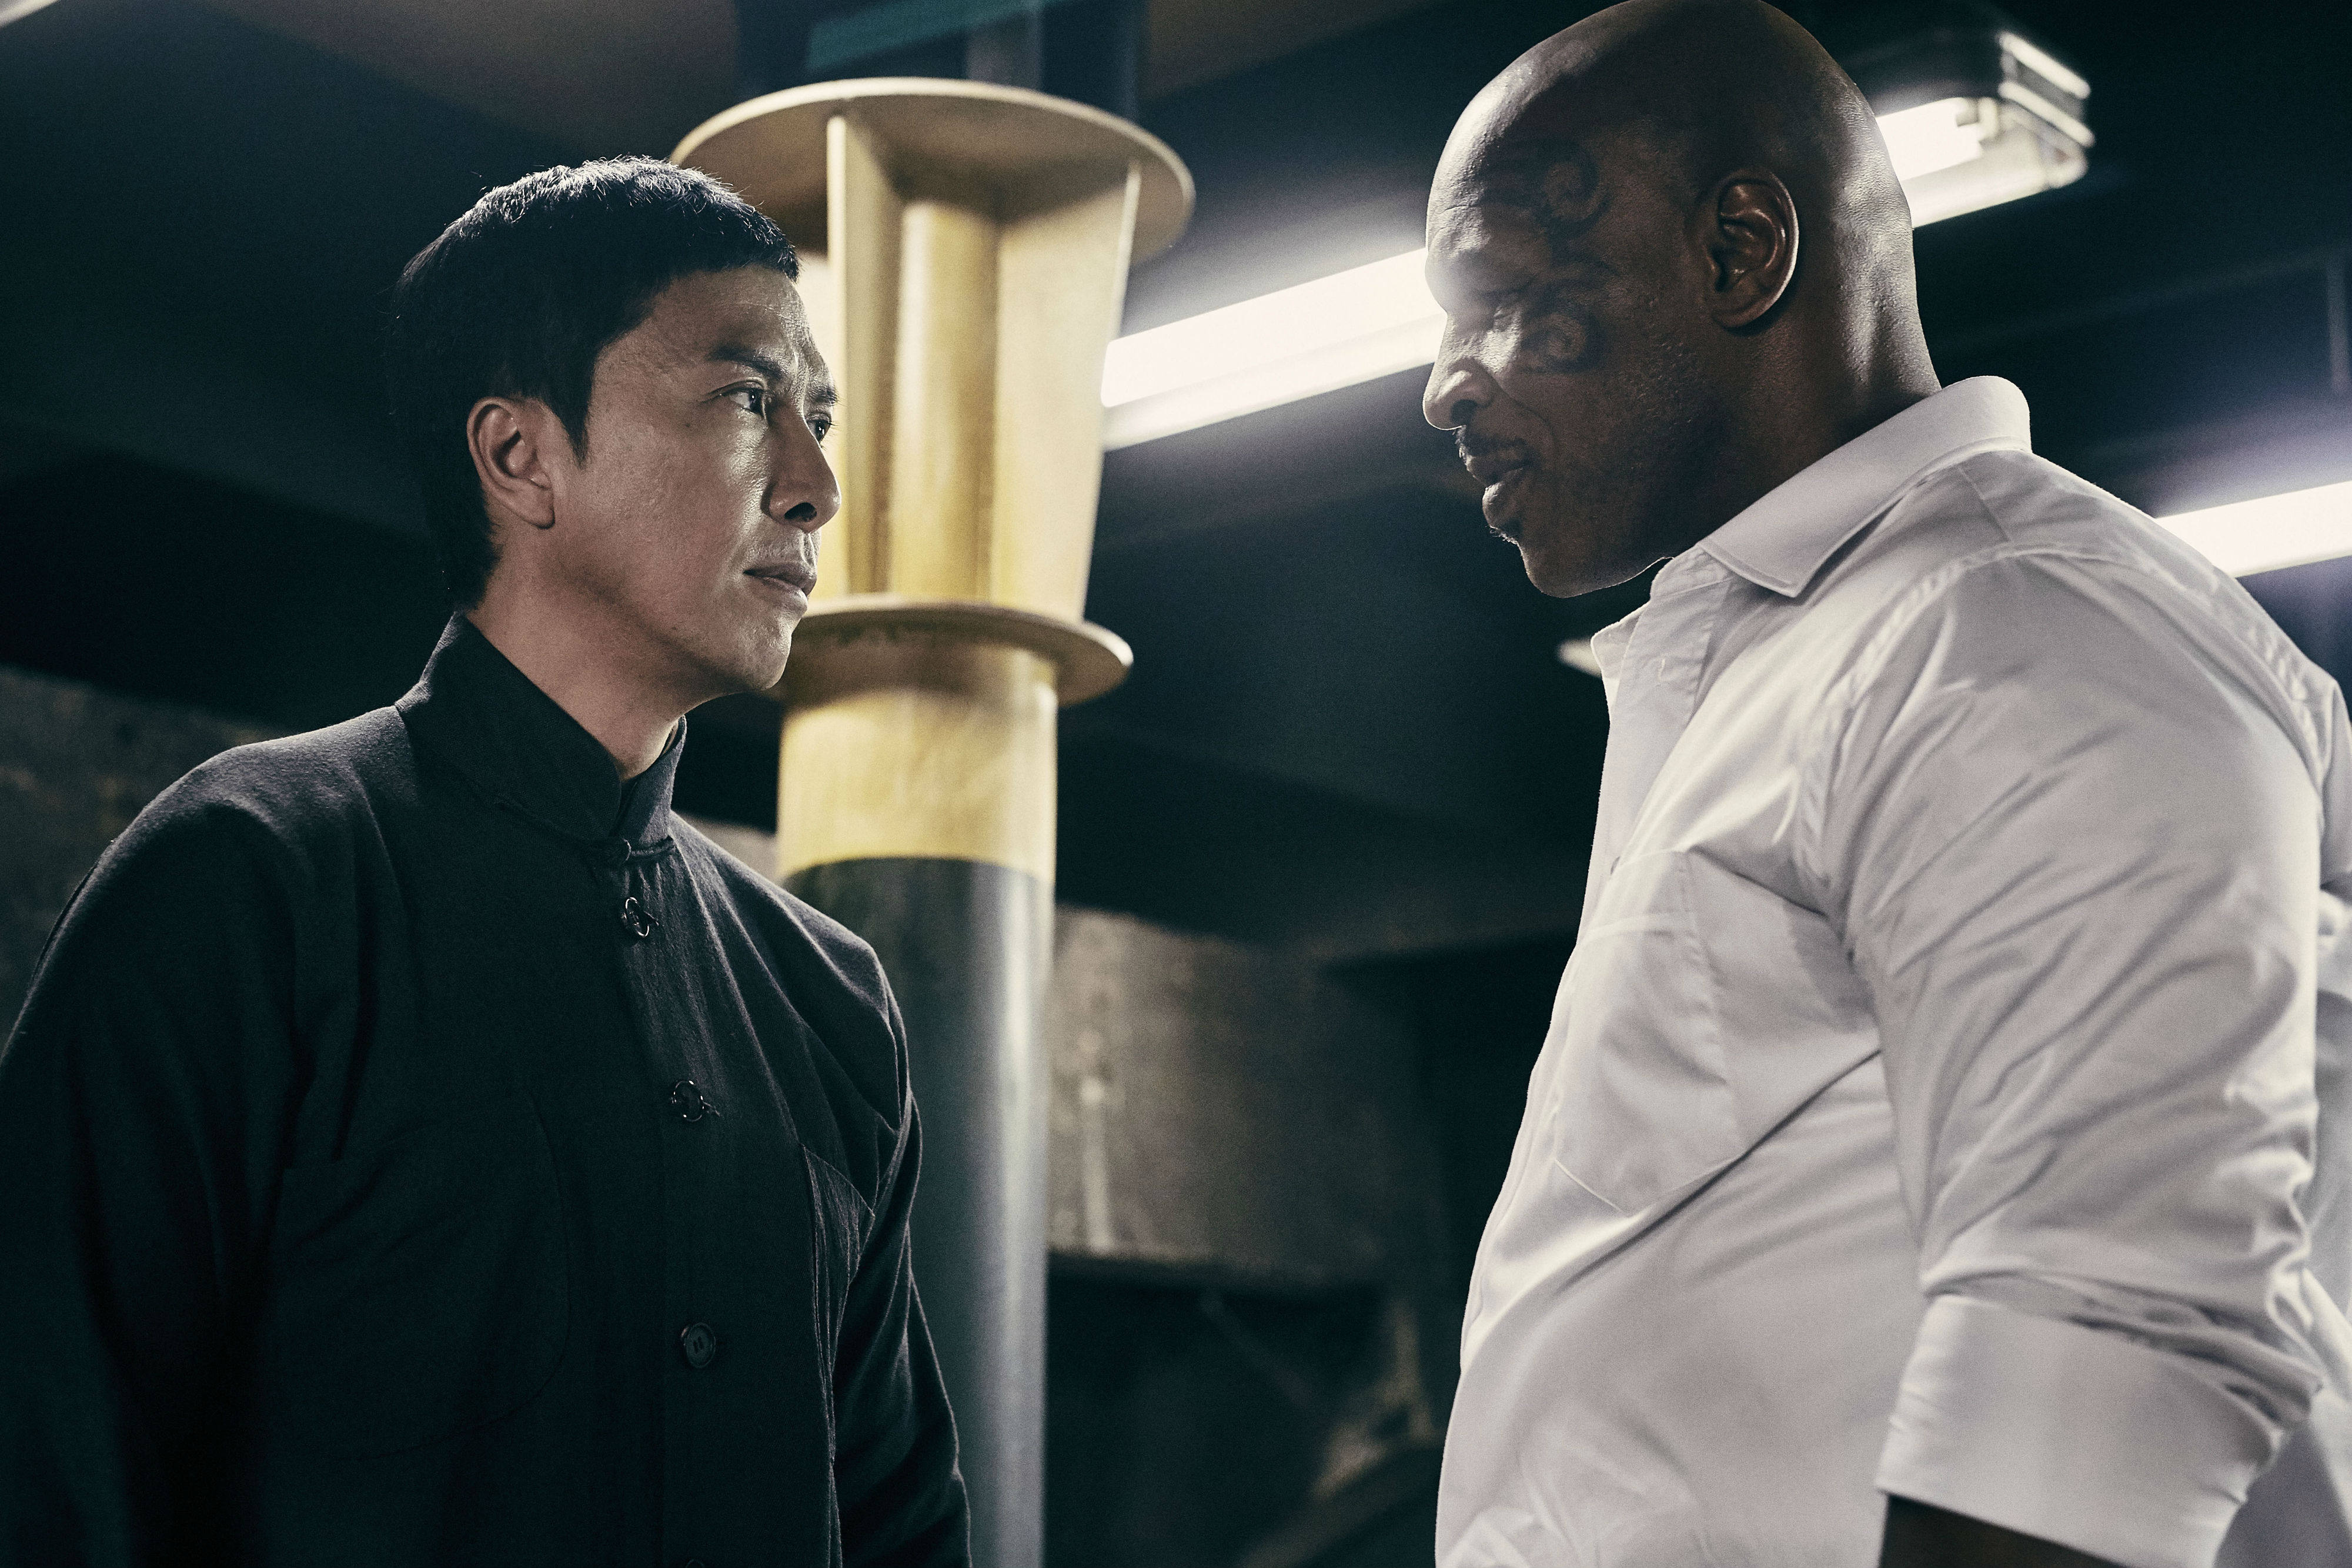 Donnie Yen (left) says he was afraid of getting killed by former world boxing heavyweight champion Mike Tyson when making Ip Man 3 in 2015.